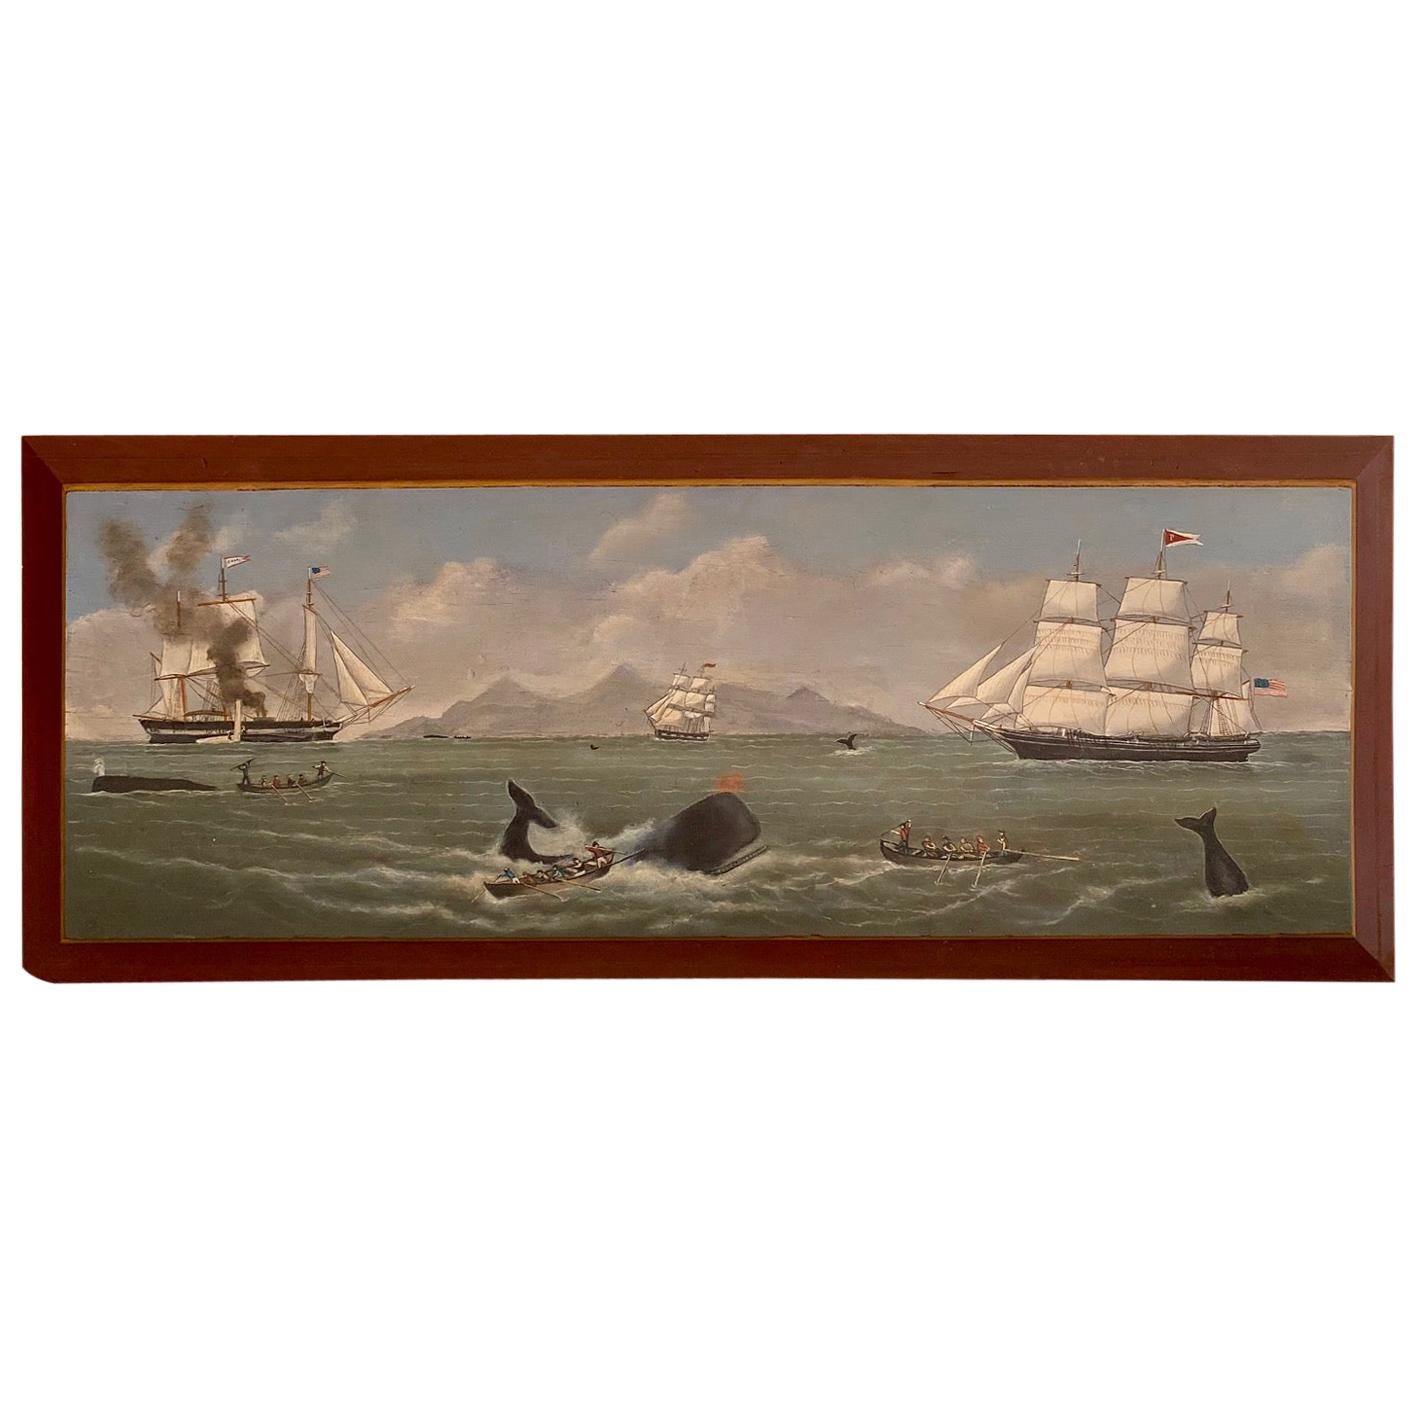 Whaling Seascape on Wooden Panel